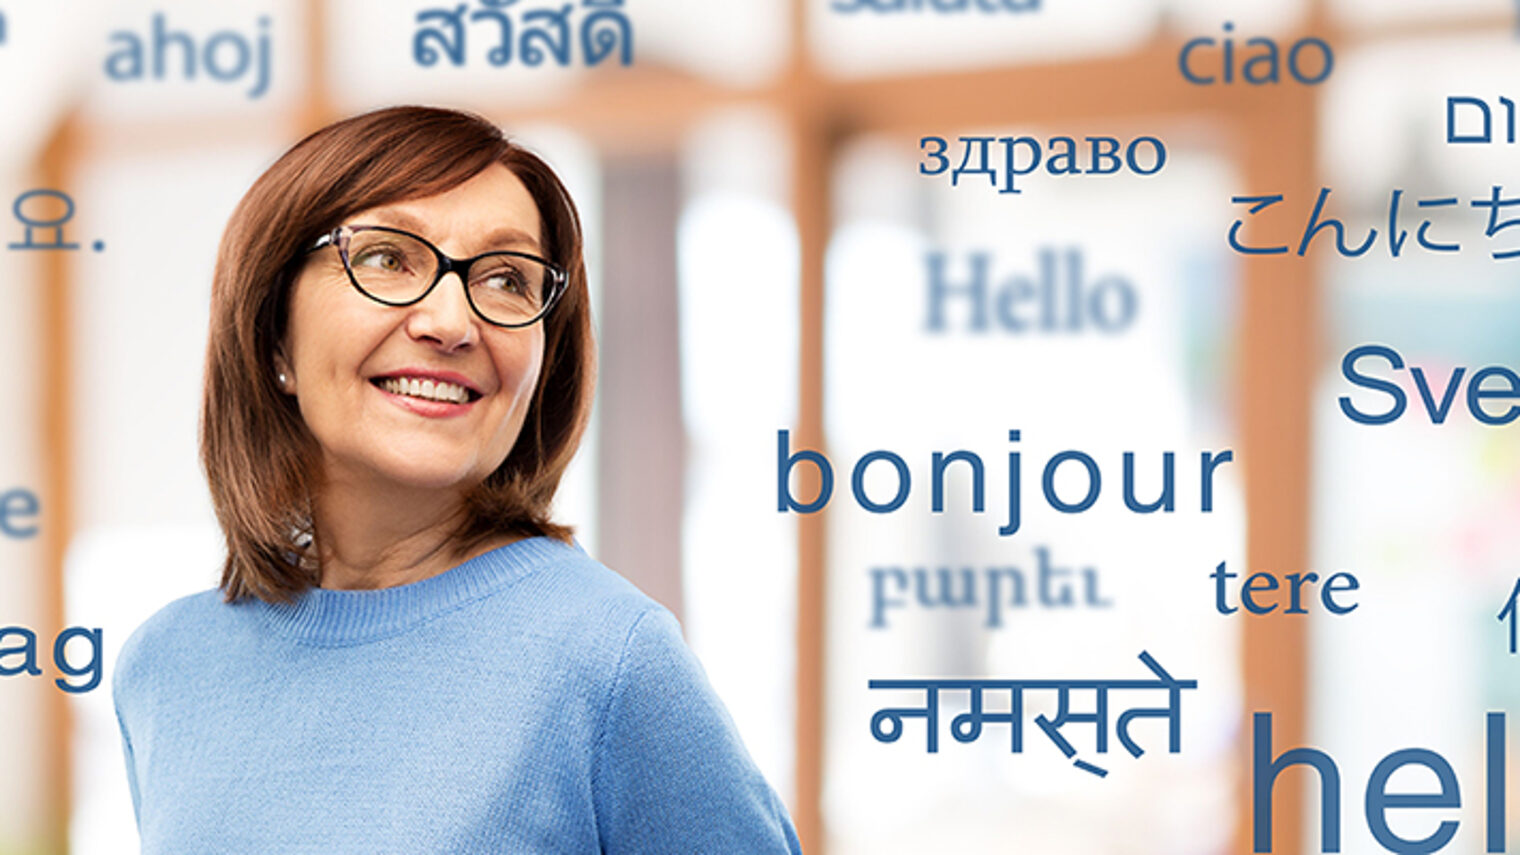 vision and old people concept - smiling senior woman in glasses over greeting words in different foreign languages Schlagwort(e): woman, old, senior, translator, language, foreign, business, businesswoman, translation, speech, translate, multilingual, dictionary, international, office, hello, hi, world, many, education, talk, speak, various, entrepreneur, professional, occupation, communication, specialist, polyglot, knowledge, learning, vocabulary, word, glasses, mature, adult, beautiful, female, elderly, aged, retired, 60s, person, people, concept, background, smiling, happy, copyspace, copy space